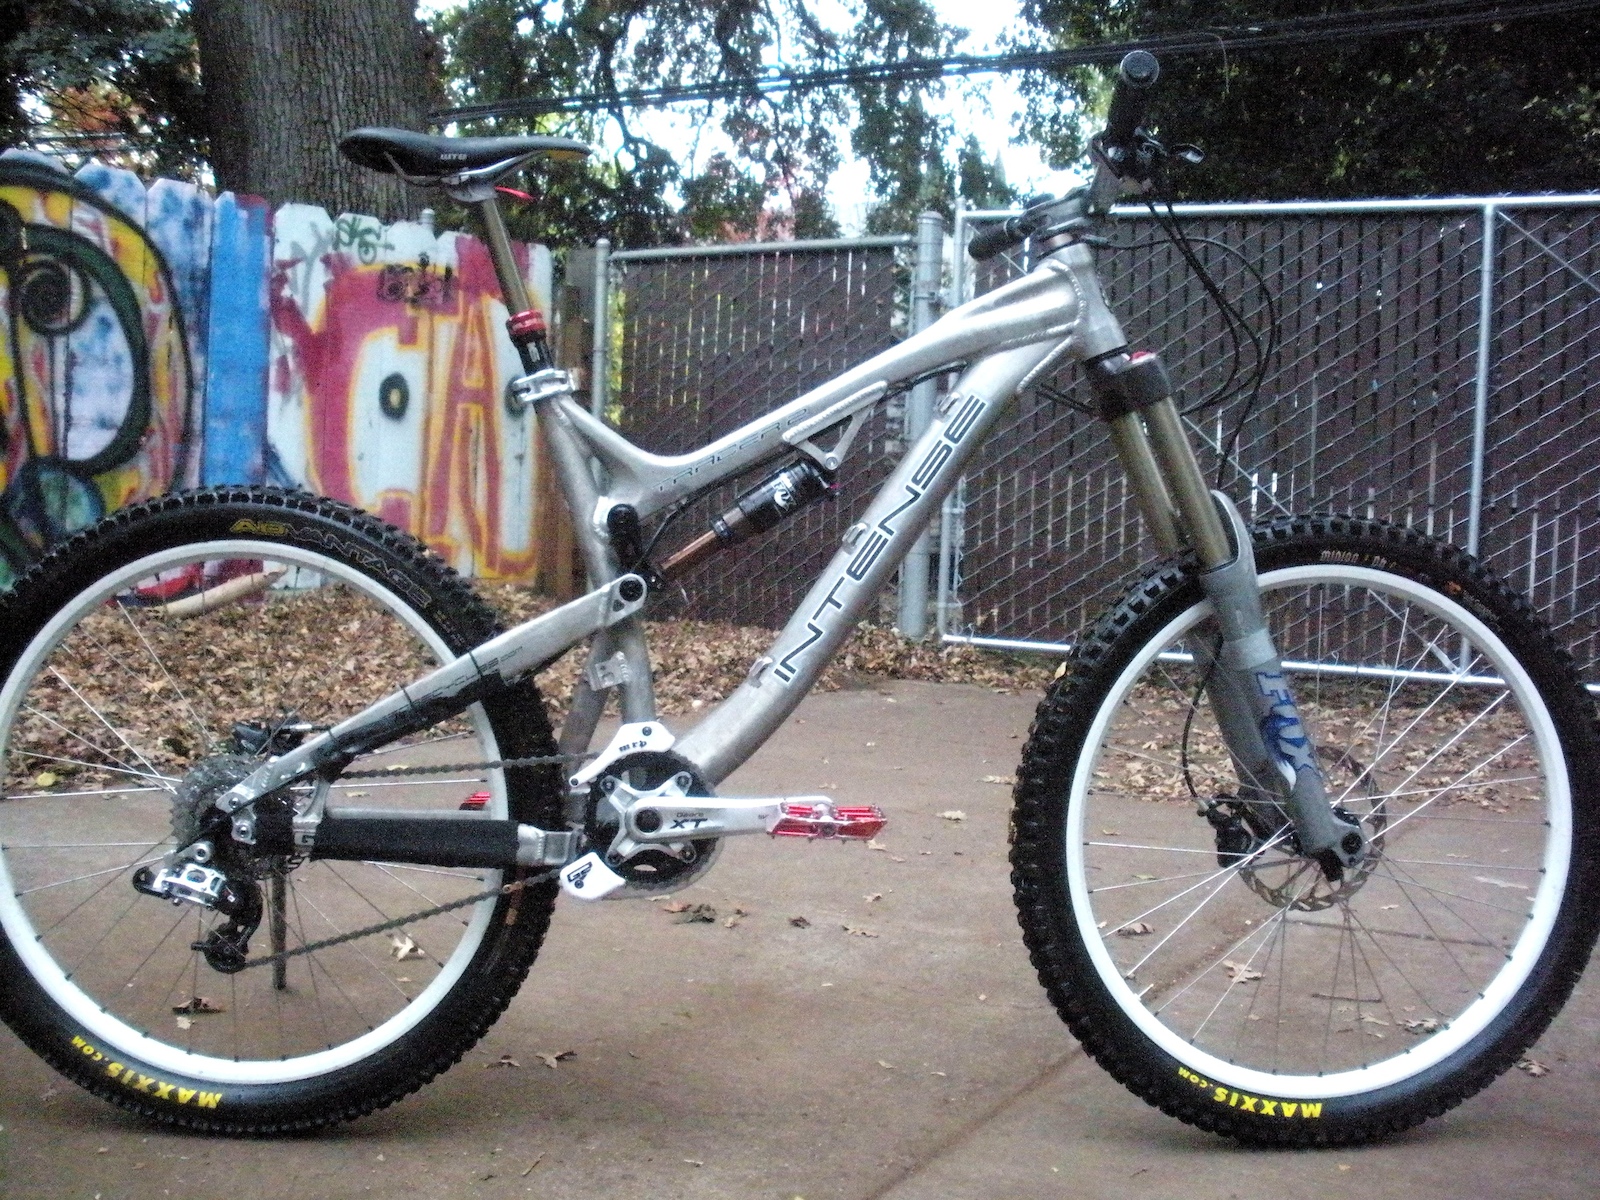 2011 Intense Tracer 2 custom build. weight aprox 32 lbs.